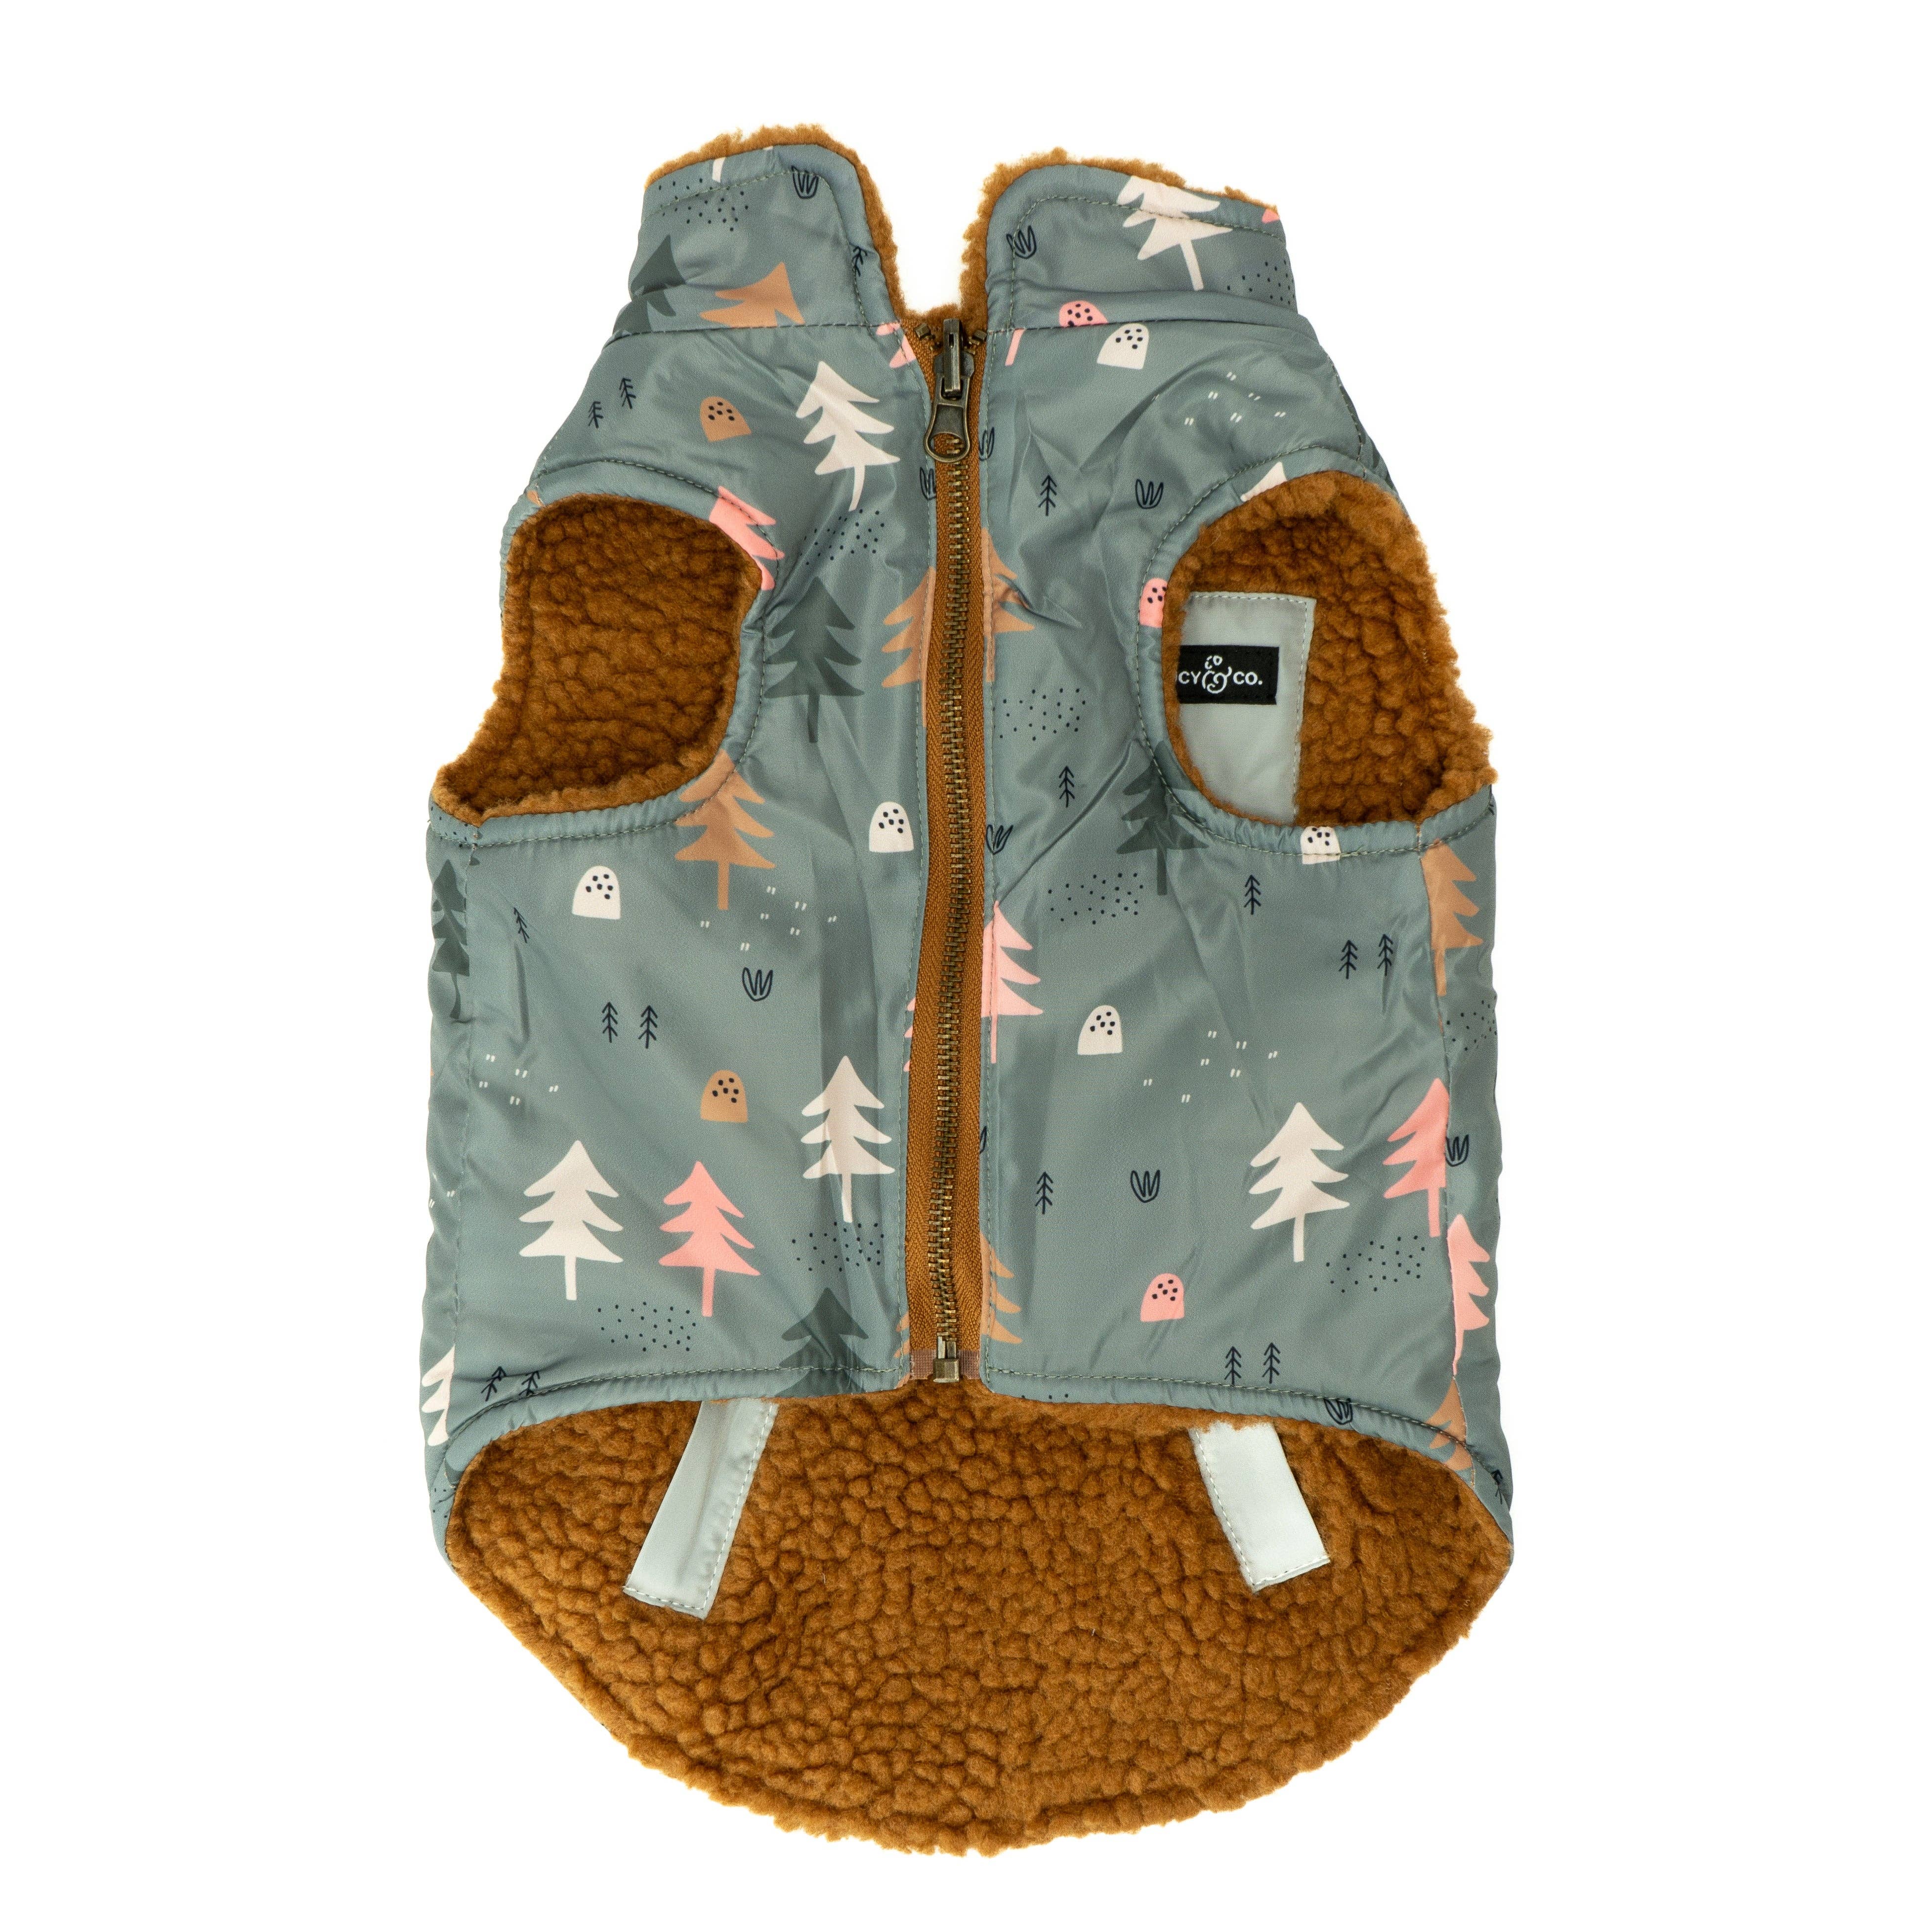 The Take a Hike Reversible Teddy Vest: 2XL